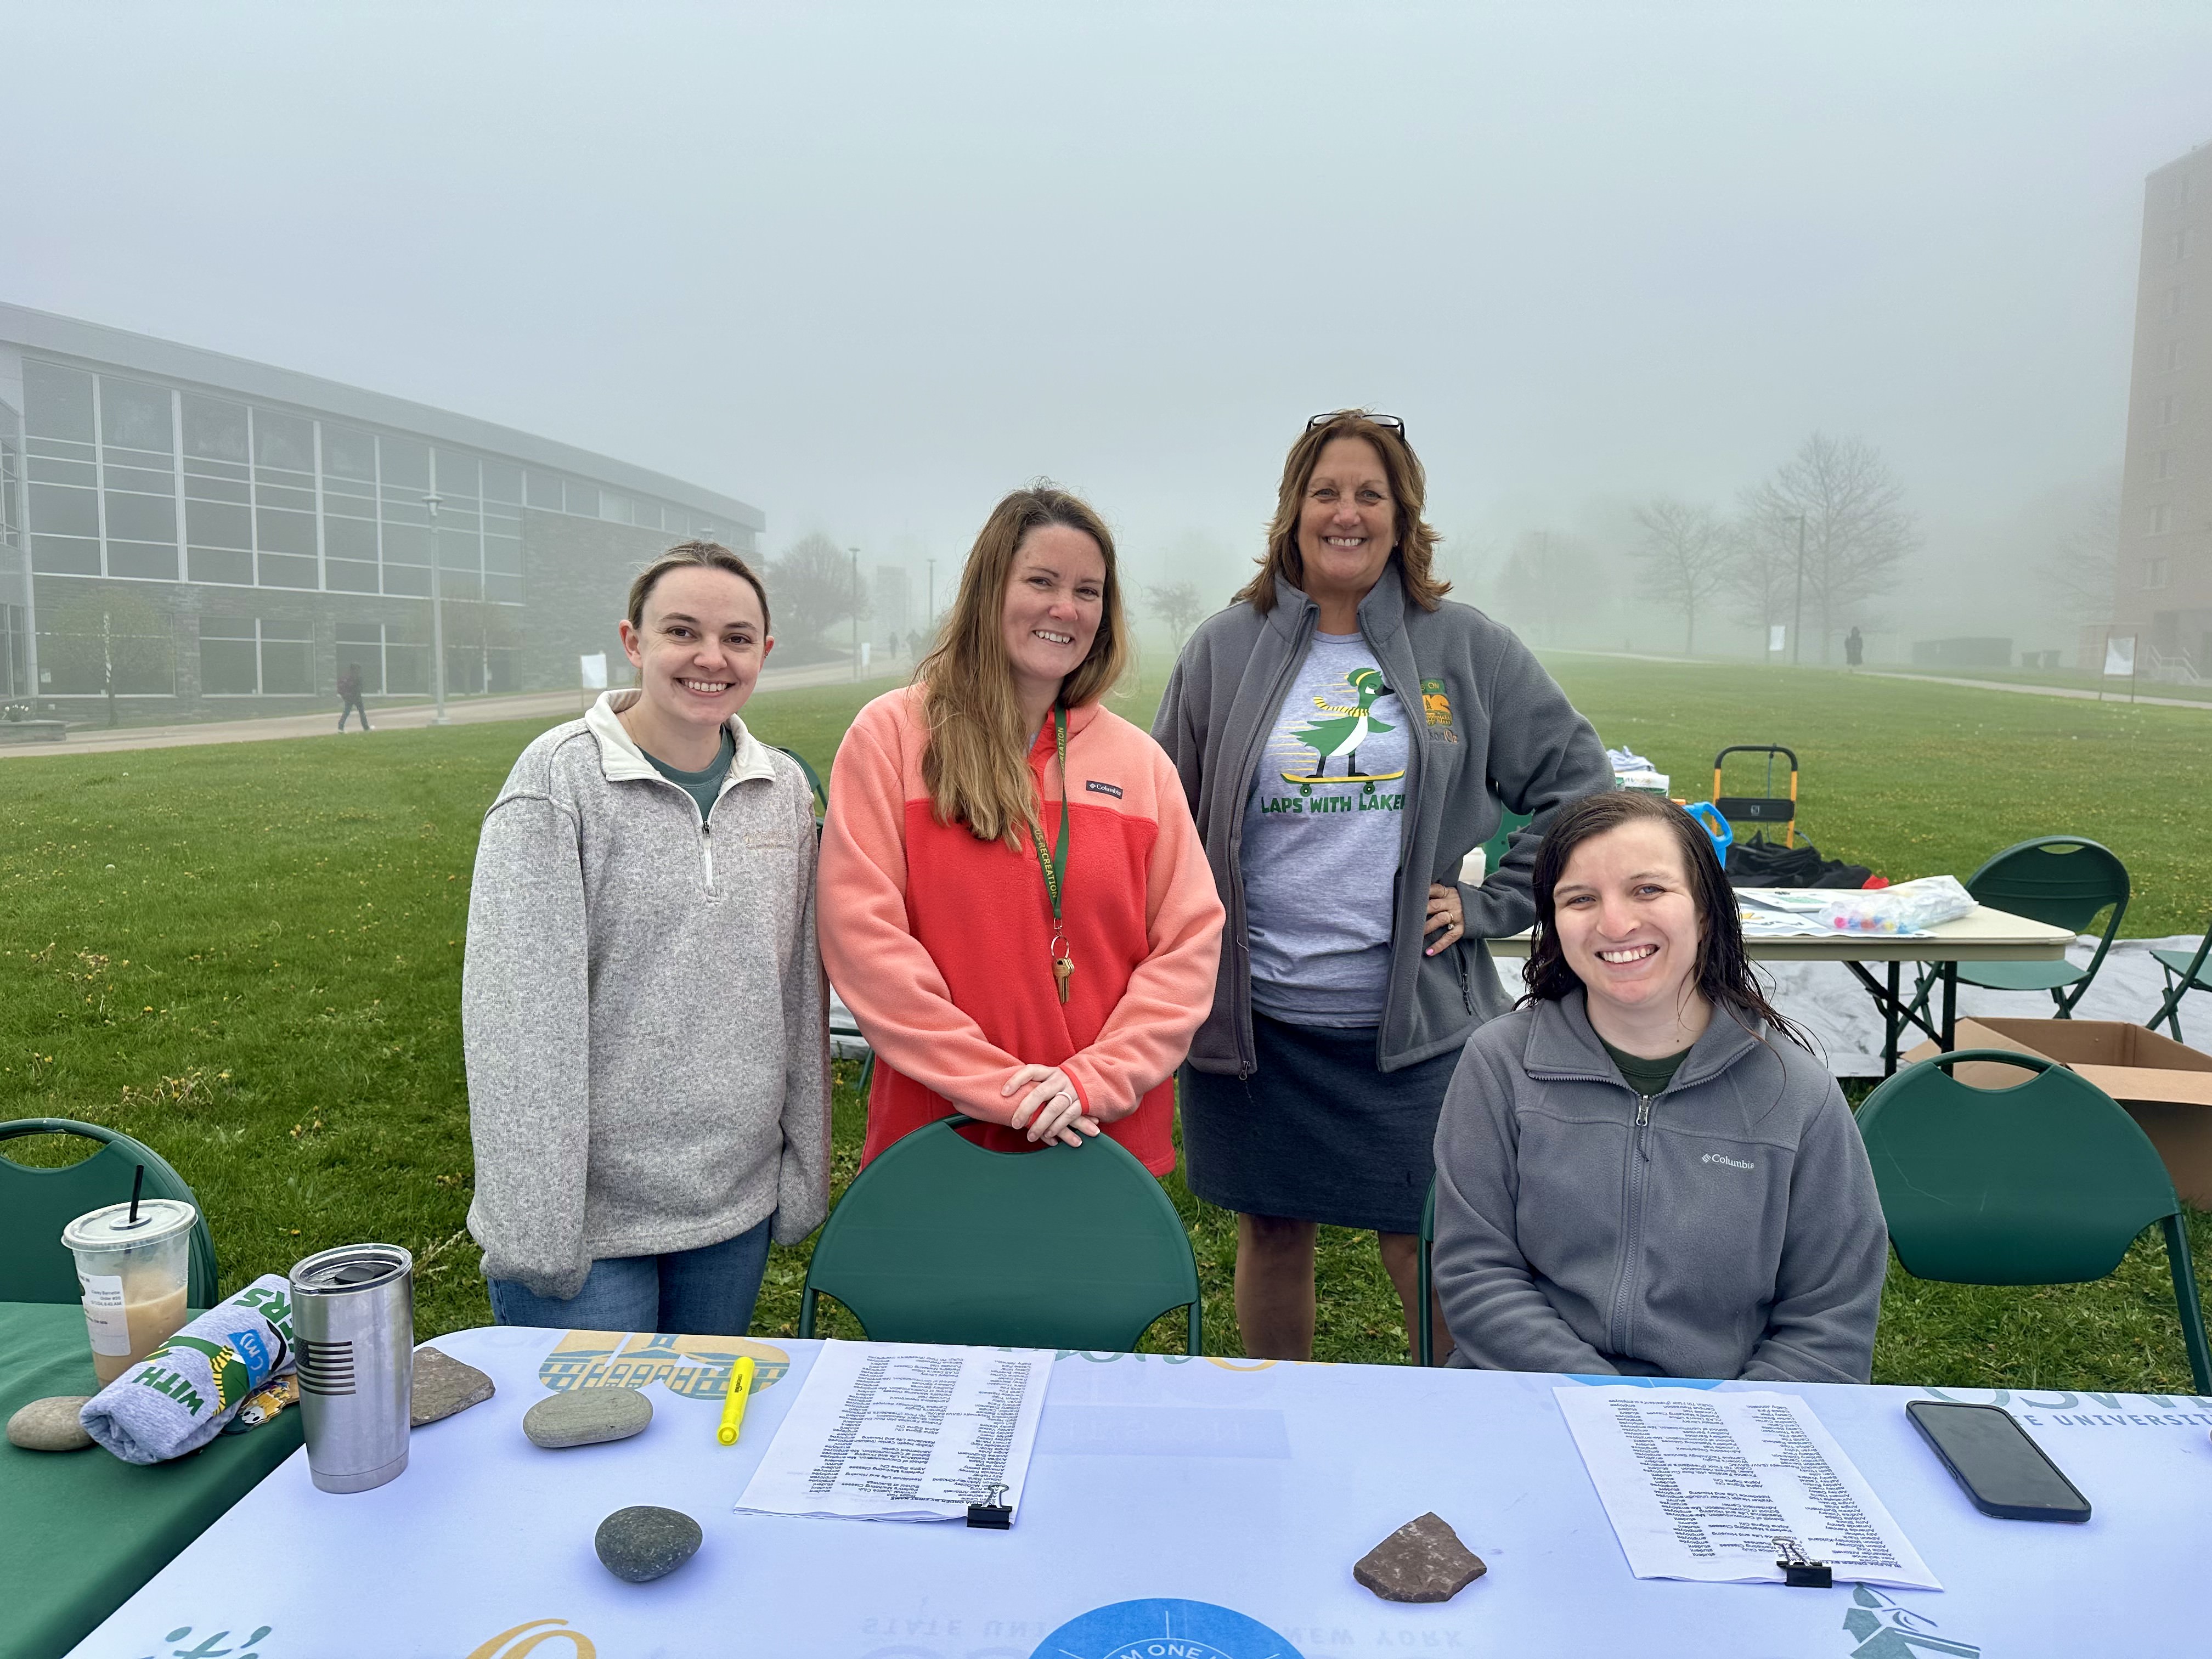 Organizers and volunteers for Laps with Lakers work the table for the event outside Marano Campus Center on the foggy morning on May 1. Laps with Lakers aims to raise awareness of sexual and interpersonal violence by challenging the campus community to walk or run laps around Academic Quad.